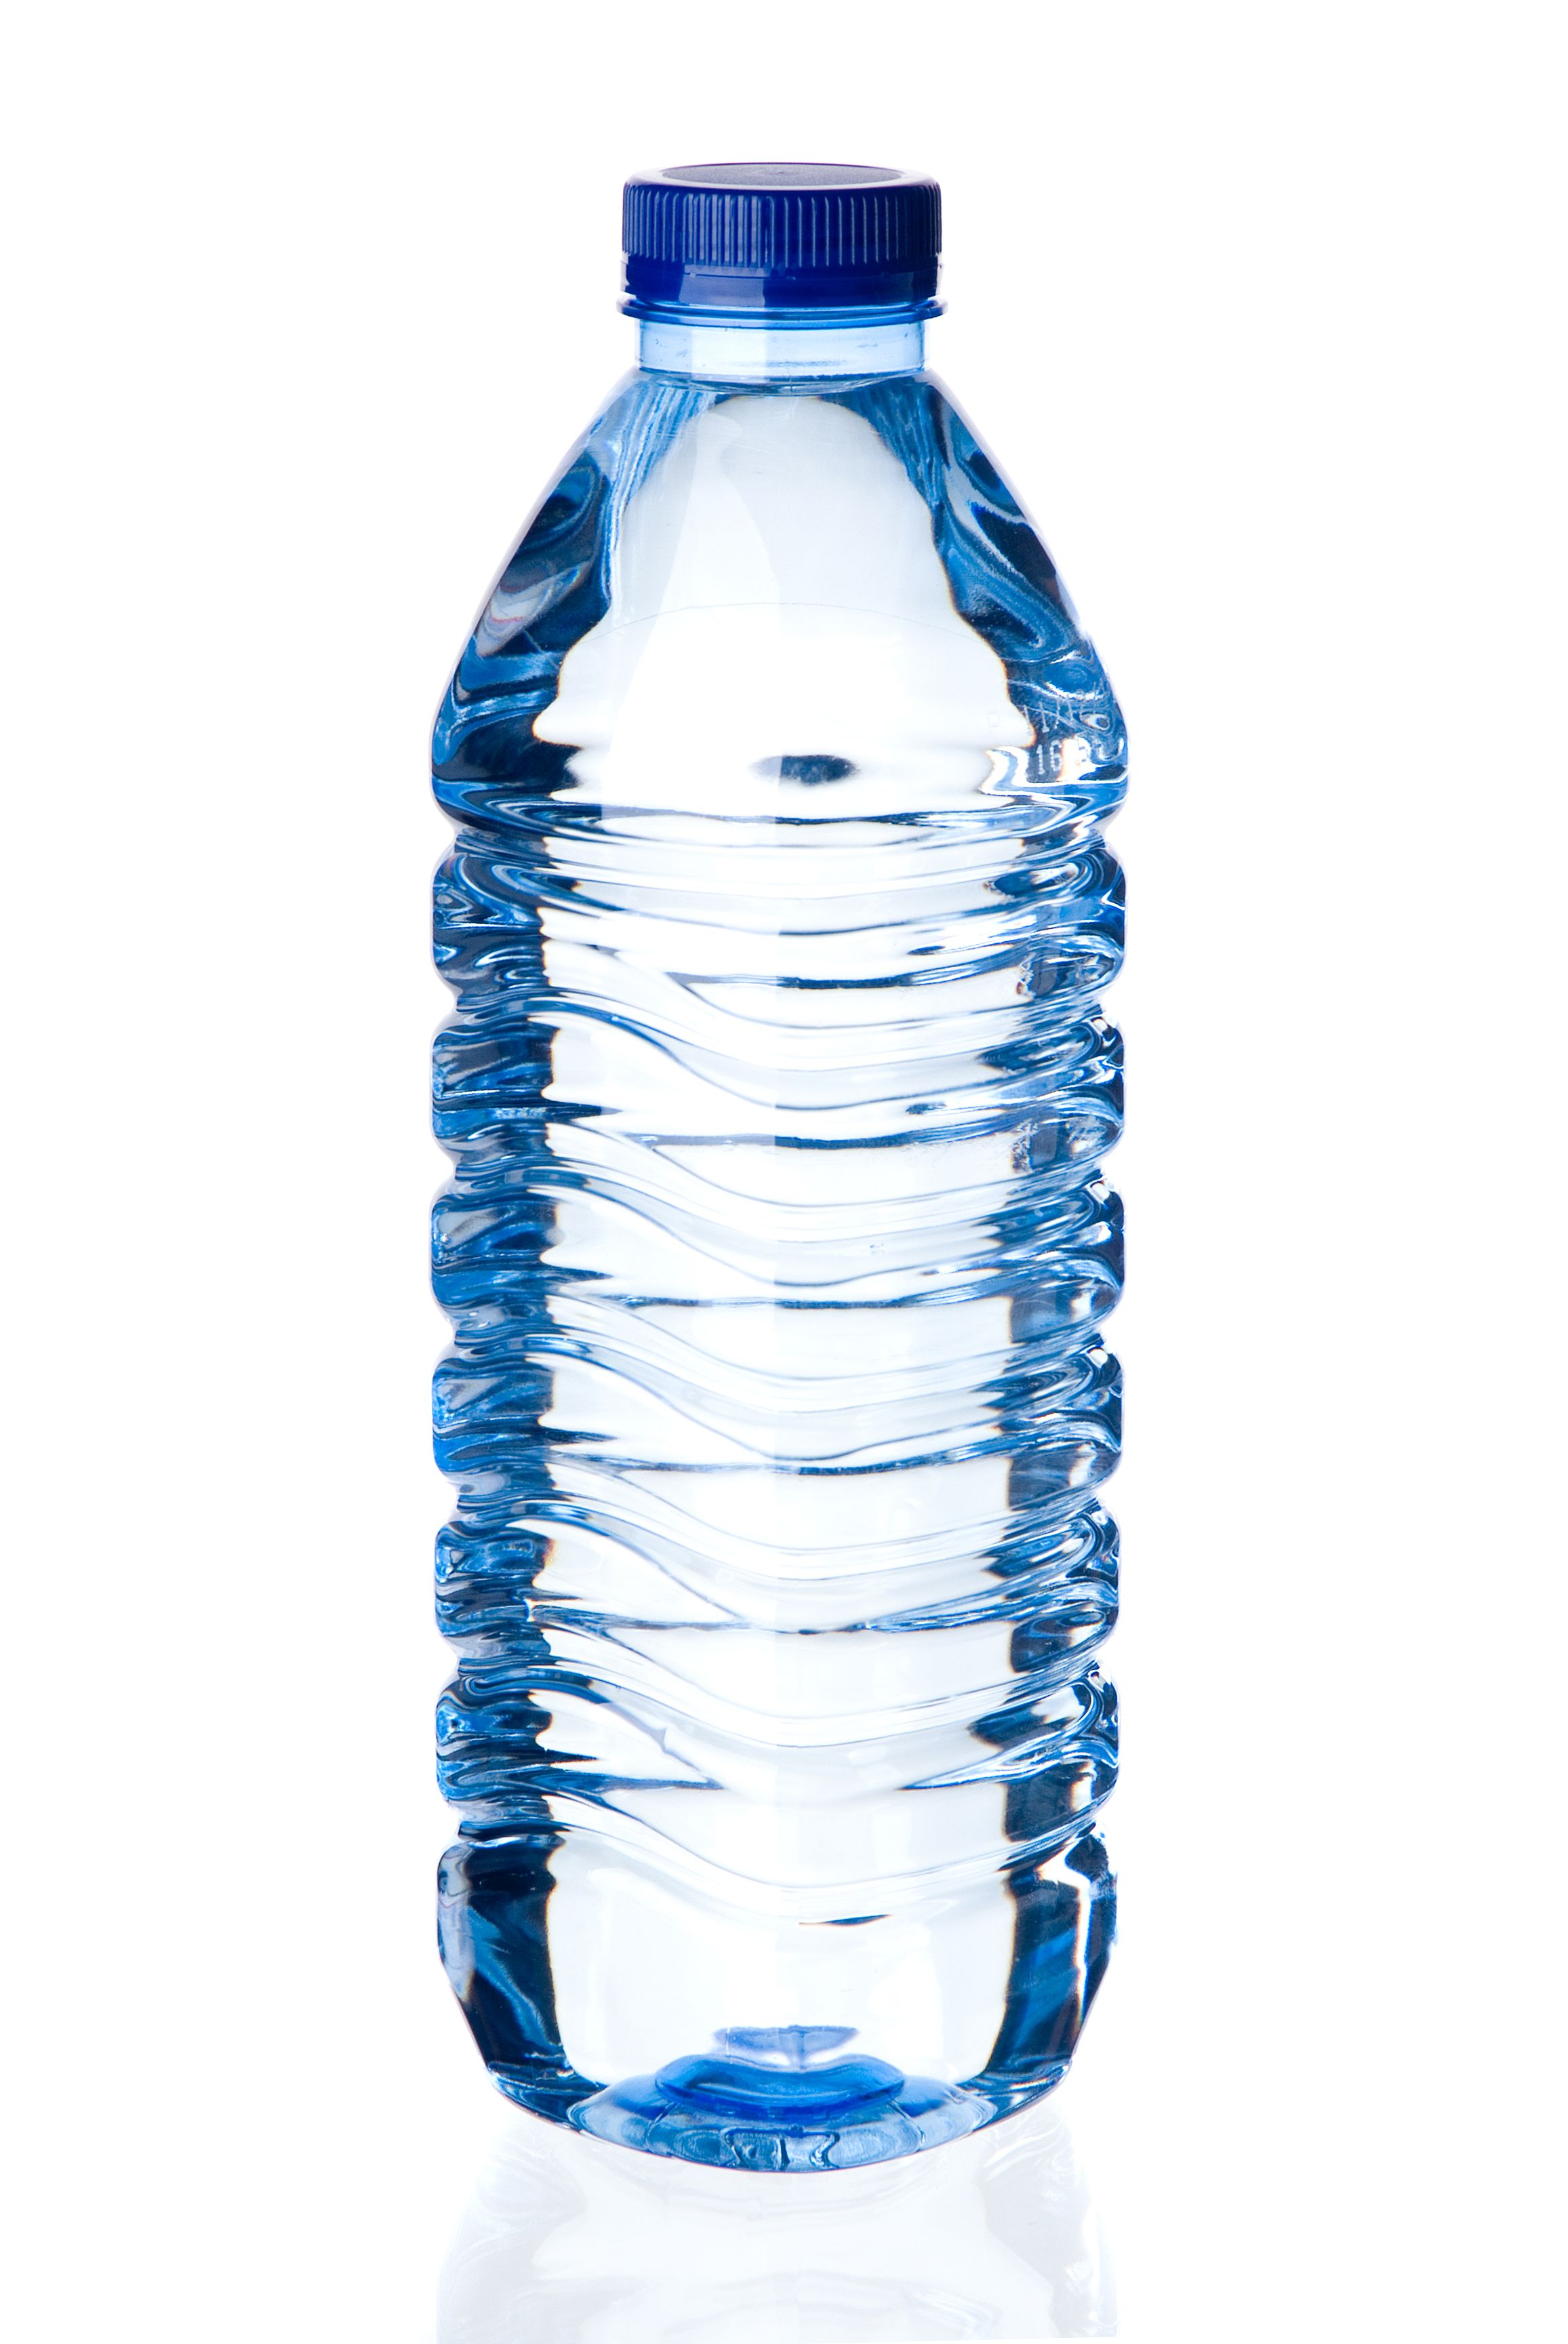 Free Mineral Water, Download Free Clip Art, Free Clip Art on Clipart Library